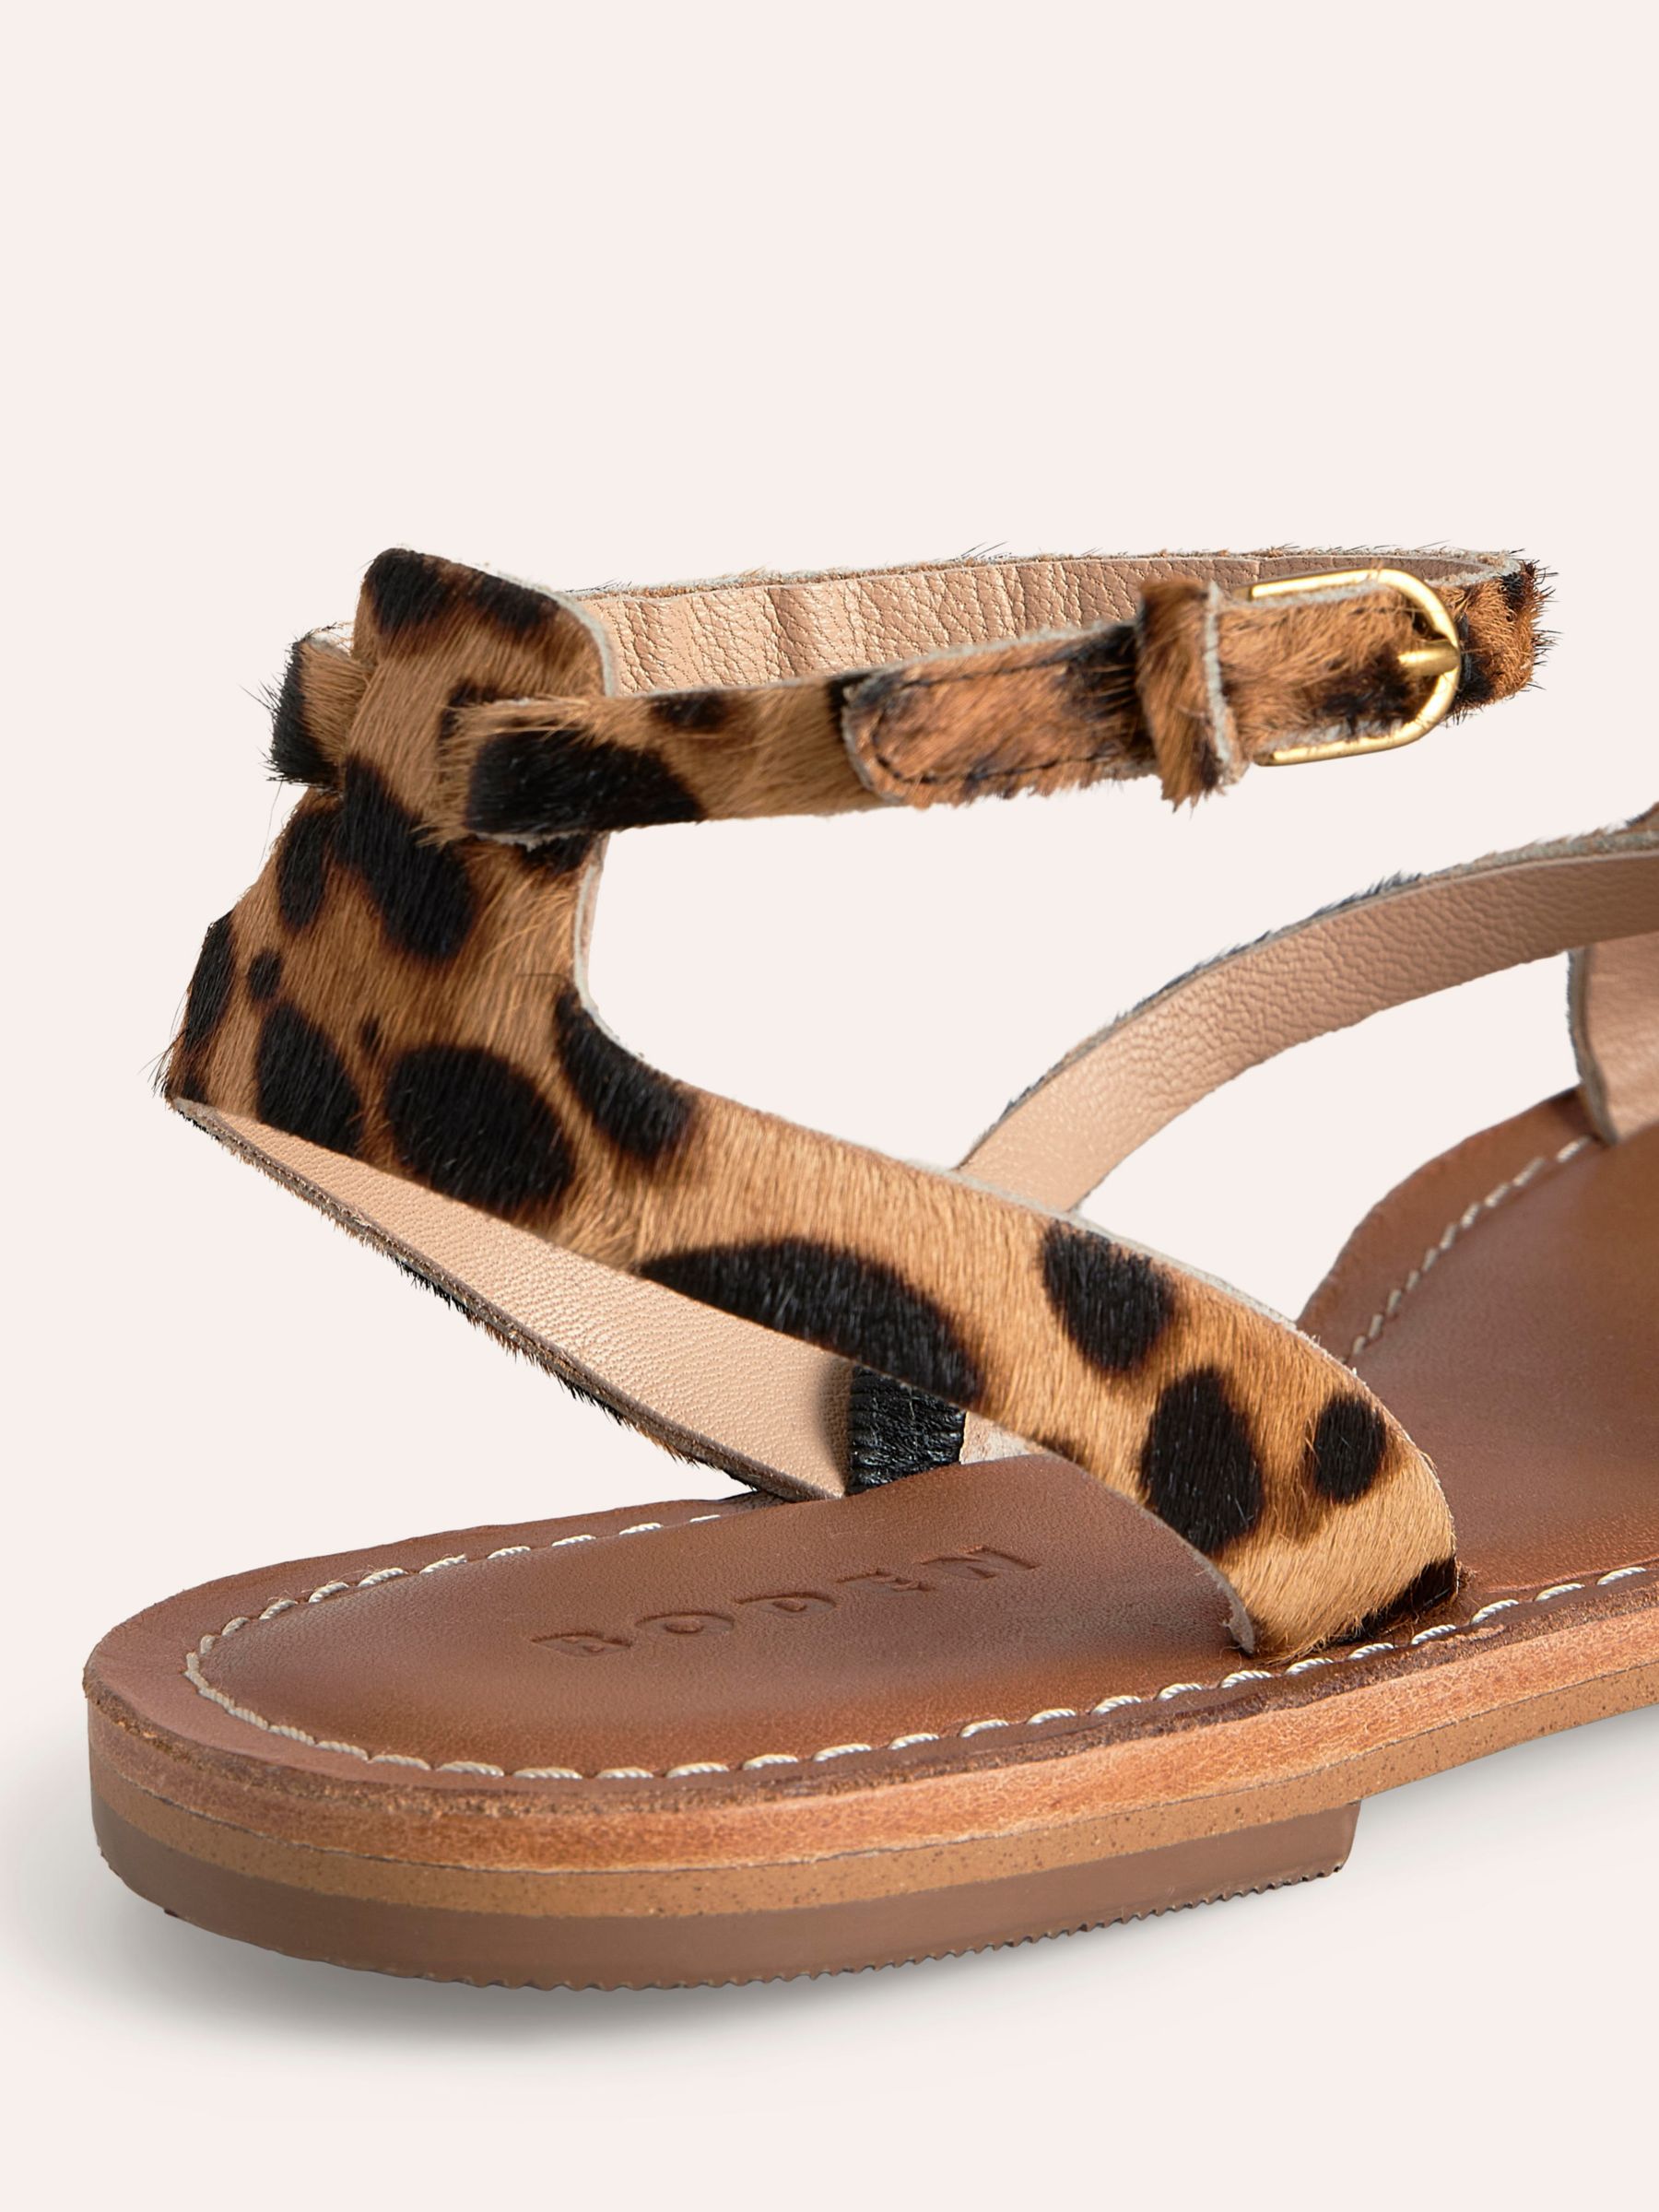 Buy Boden Everyday Flat Sandals, Classic Leopard Online at johnlewis.com